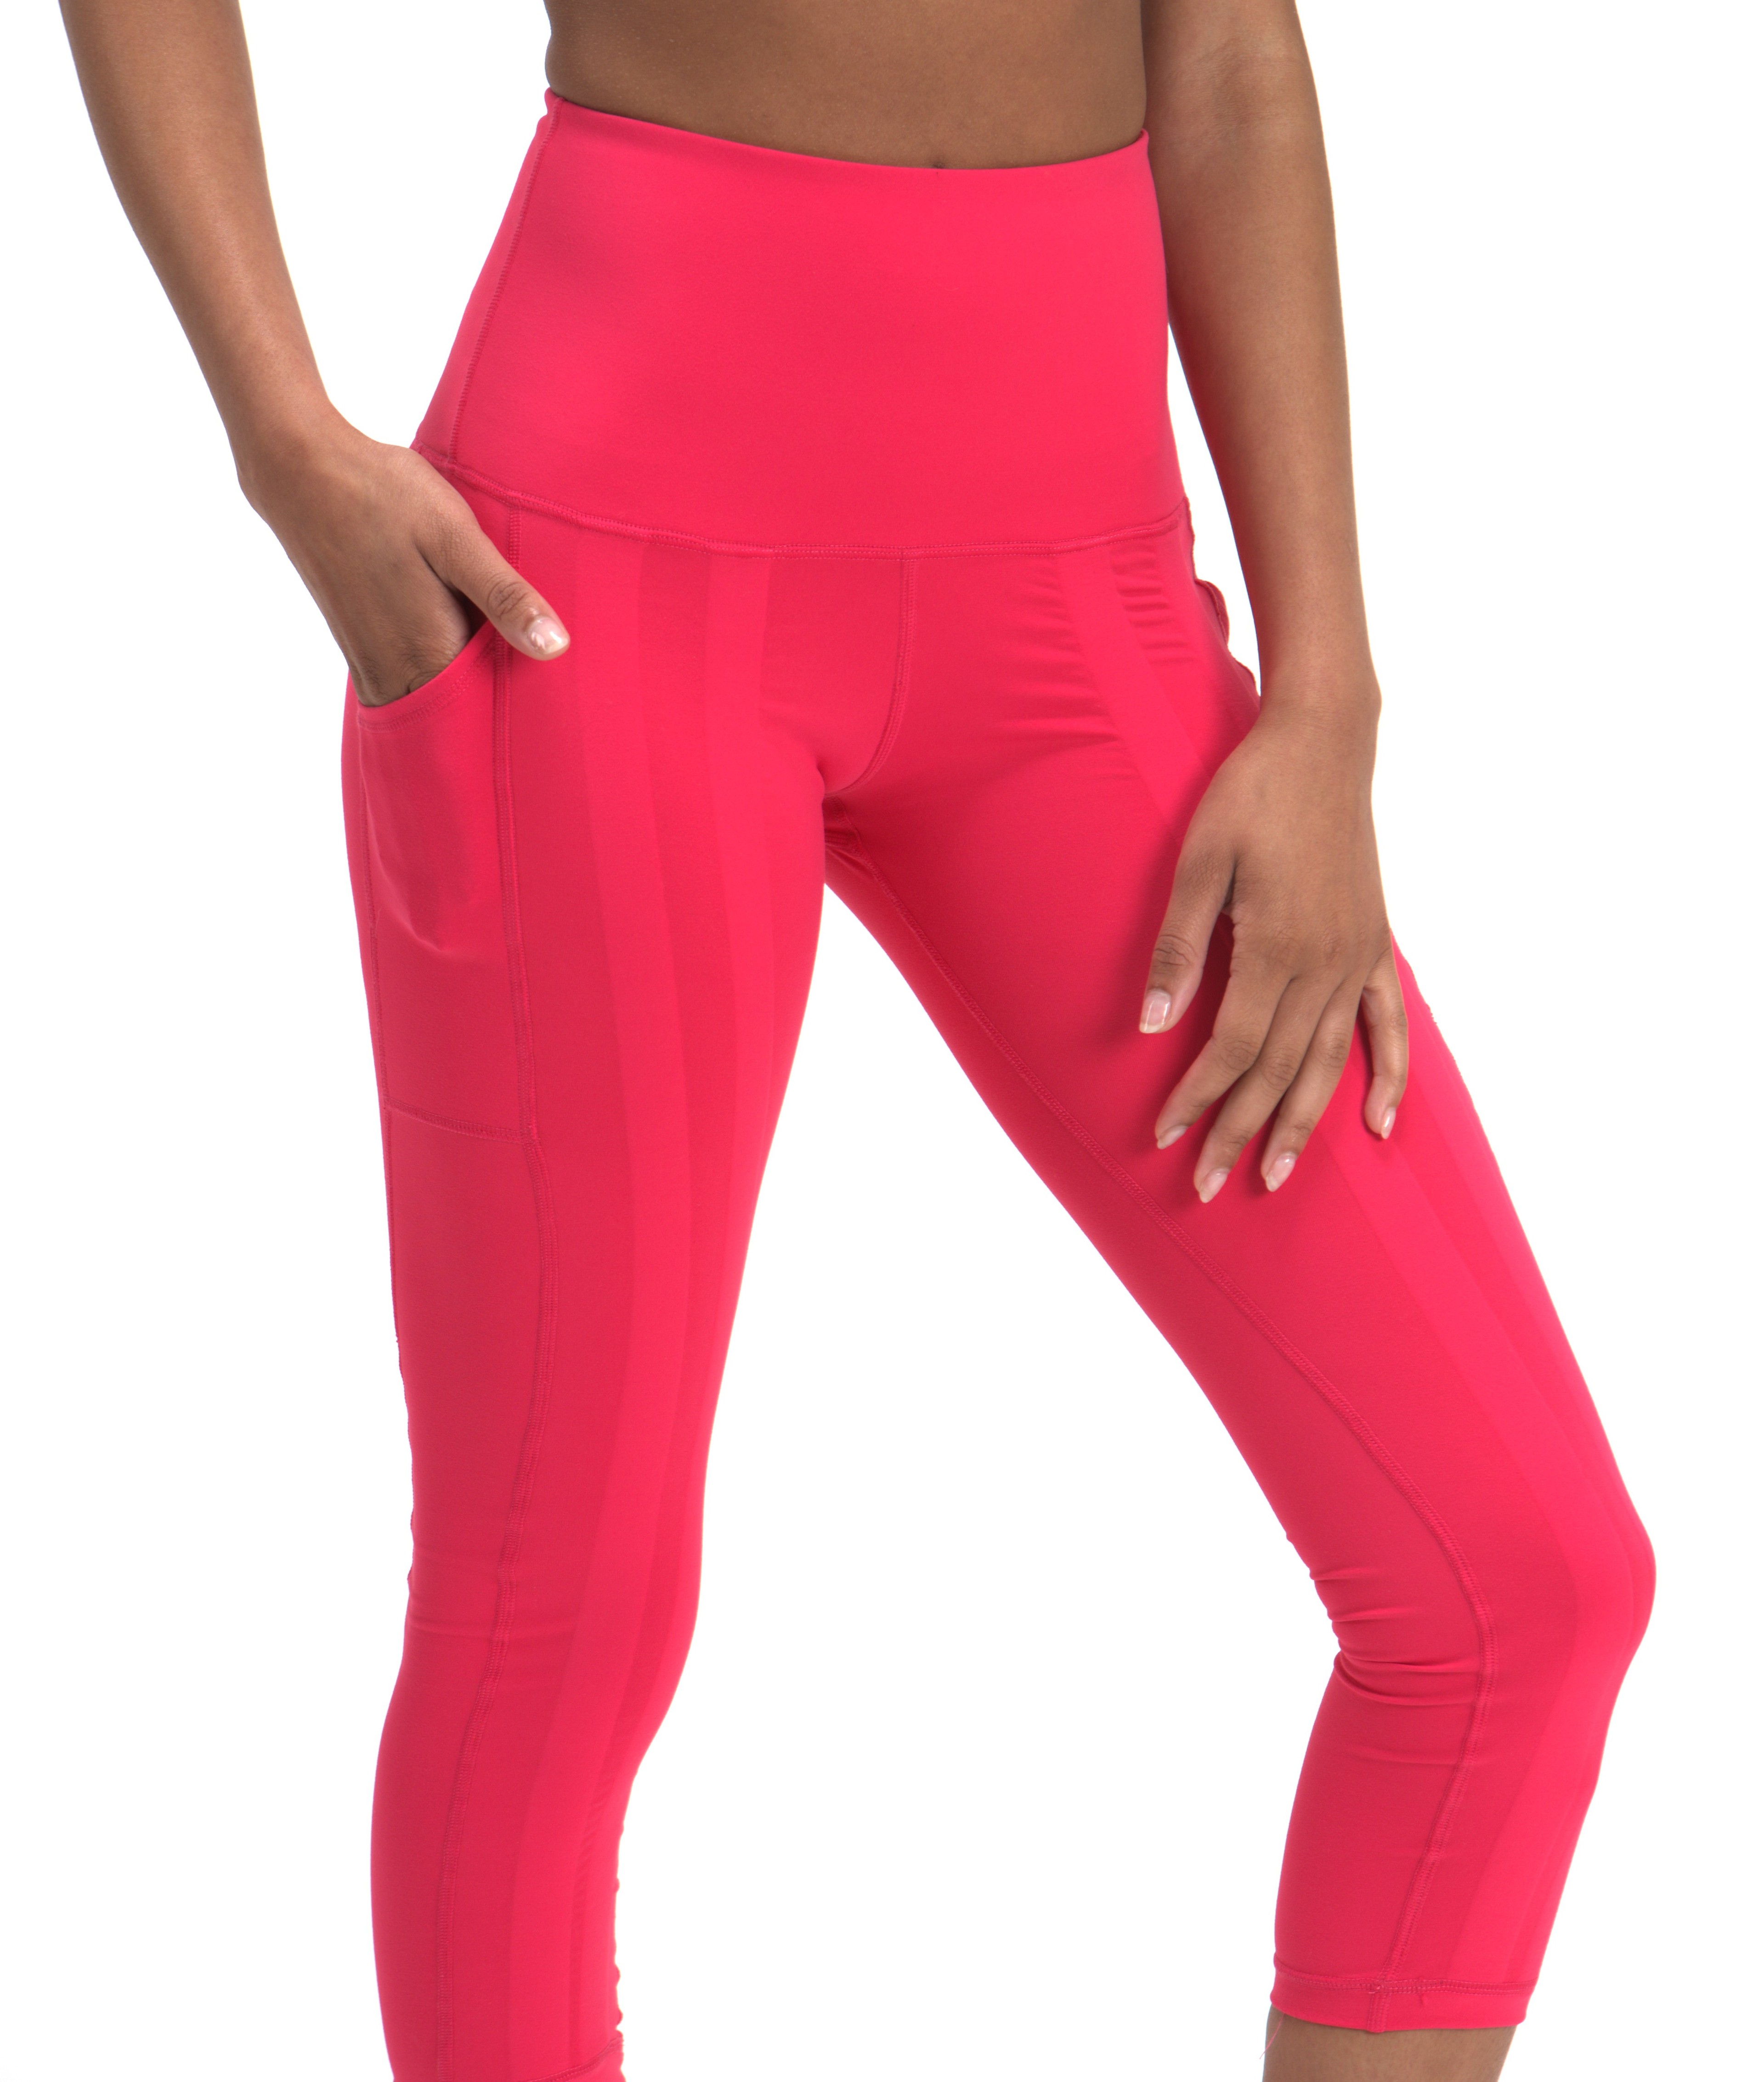 Sweetflexx: Resistance Band Leggings for on the Go Fitness